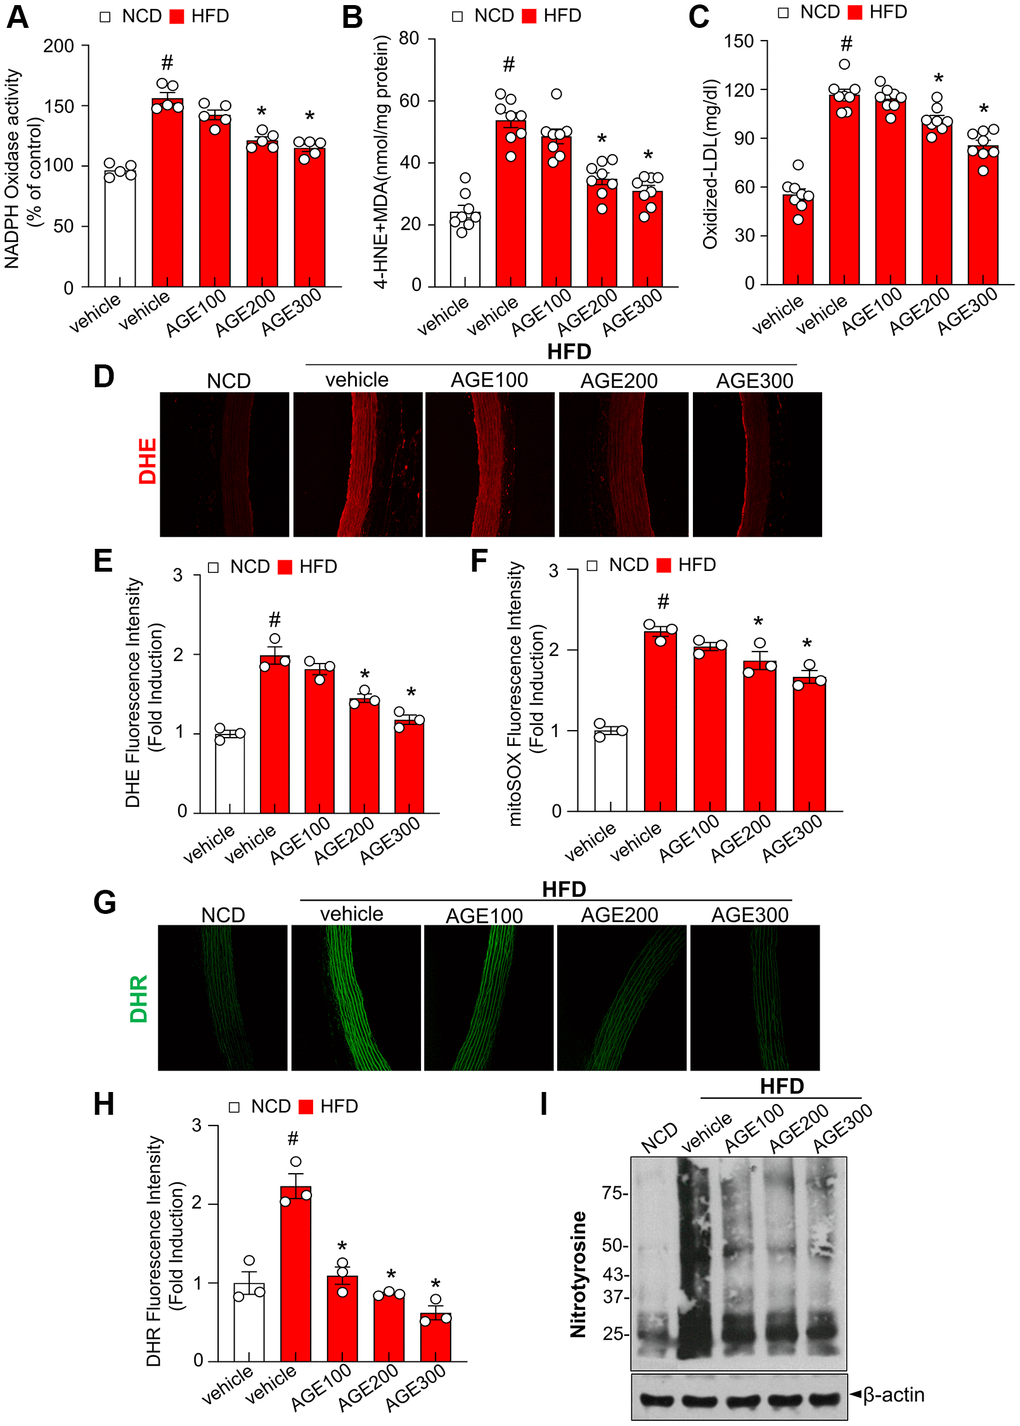 AGE inhibits oxidative stress in hyperlipidemic rats. (A) NADPH oxidase activity determined via lucigenin chemiluminescence assay. (B) 4-HNE + MDA level was measured as described in Materials and Methods. (C) Oxidized low-density lipoprotein (Ox-LDL) cholesterol content in plasma. (D) Representative images of DHE staining for ROS production and (E) quantification of DHE fluorescence intensity for ROS levels in aortas. (F) Quantification of mitoSOX fluorescence intensity for mitoROS levels in aortas. (G) Representative images of DHR staining for peroxynitrite in aortas and (H) quantification of DHR fluorescence intensity for peroxynitrite levels in aortas. (I) Nitrotyrosine analysis was performed as was described in Materials and Methods. Values are presented as mean ± SEM (n = 4~9, #p *p Angelica gigas NAKAI extract.